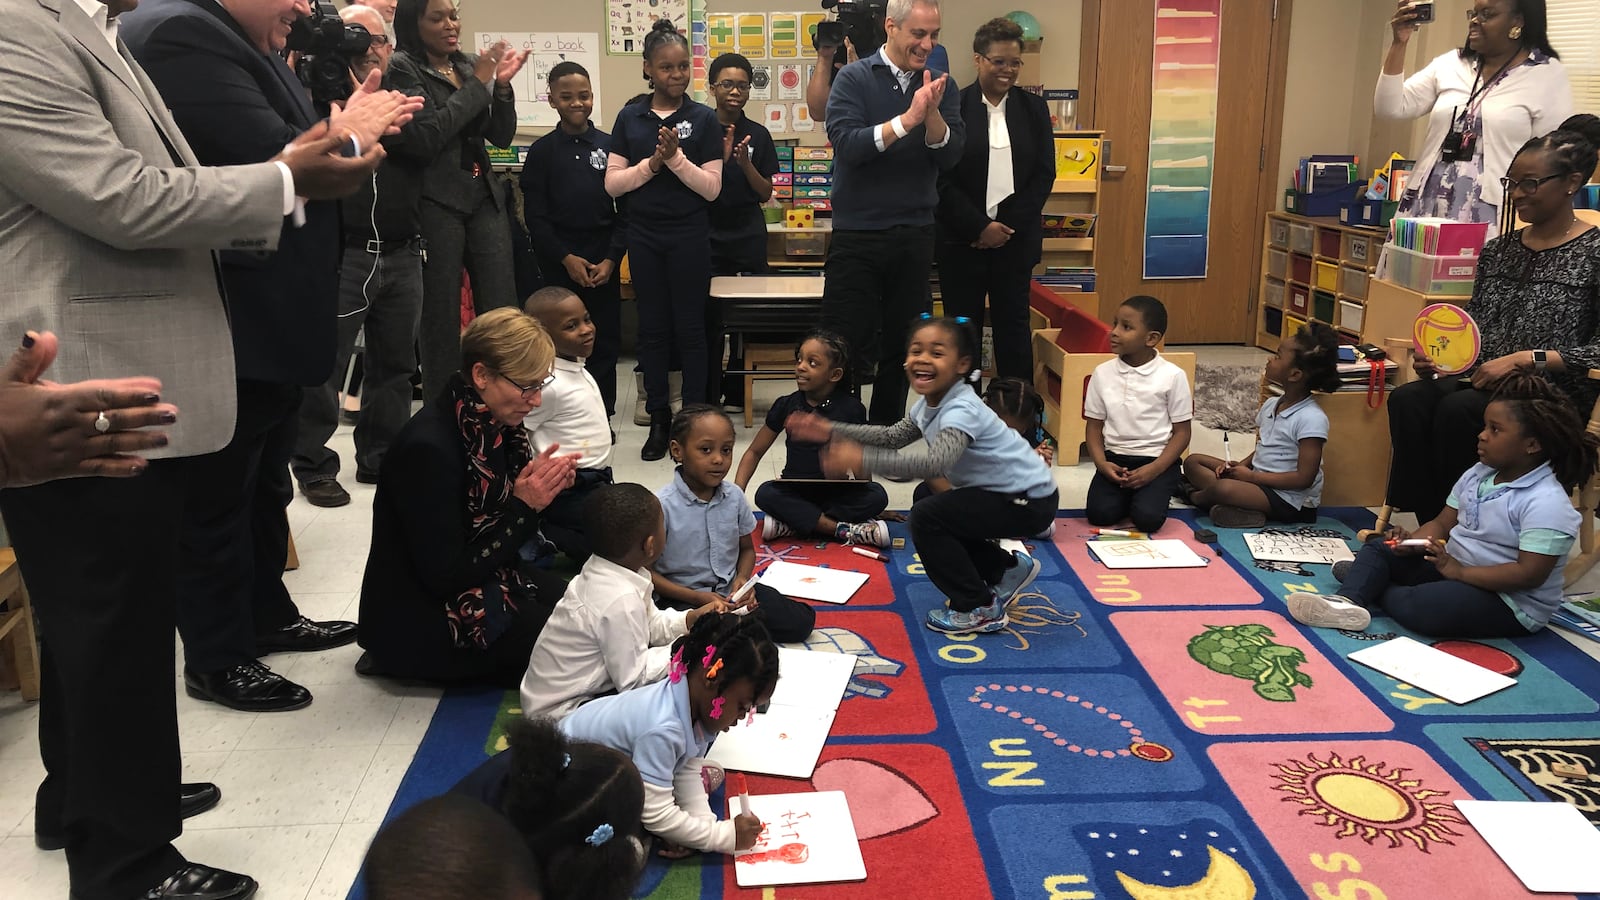 Illinois Gov. J.B. Pritzker, second from left, Chicago schools chief Janice Jackson and Mayor Rahm Emanuel, in front of TV camera, visit a pre-kindergarten classroom at John T. Pirie Fine Arts and Academic Center on March 22, 2019. Emanuel announced an expansion of preschool and day care.